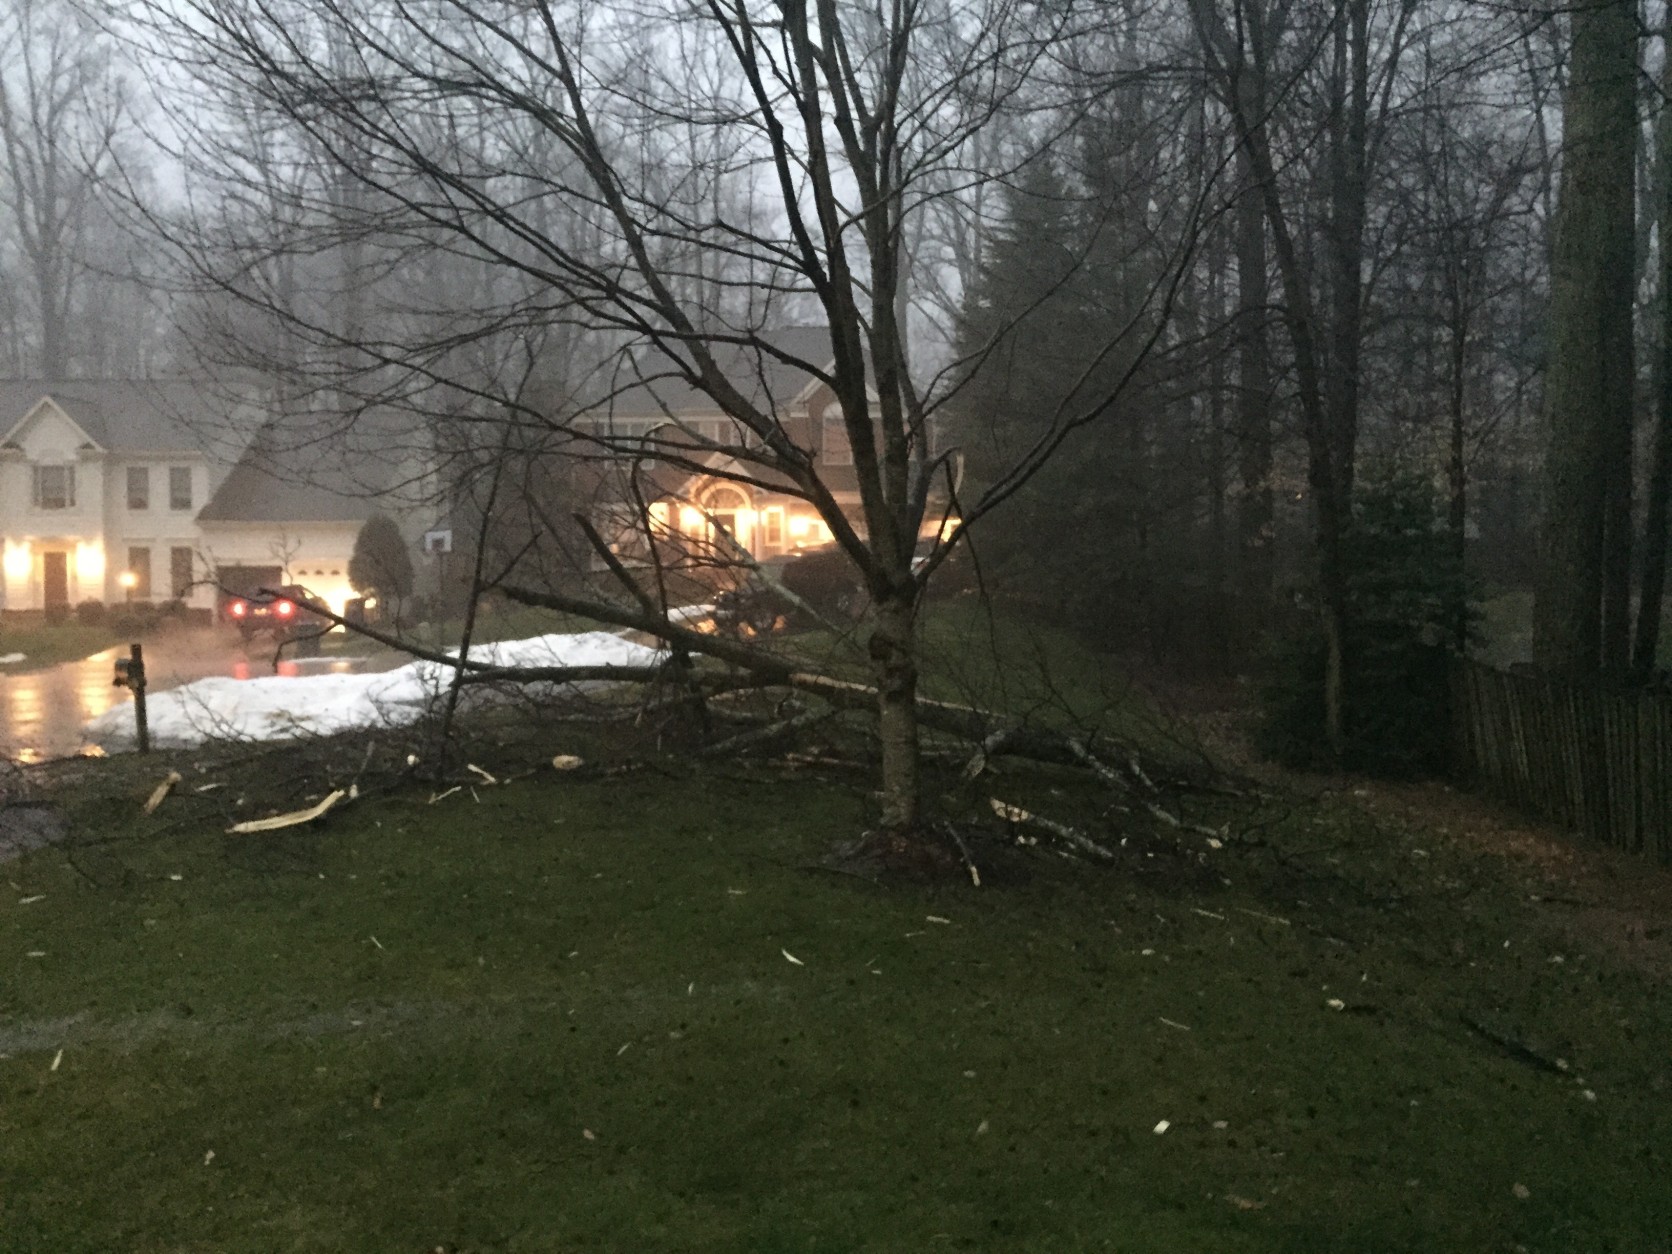 Tree damaged during the Feb. 24, 2016 storm in Burke, Virginia. (Courtesy WTOP listener)